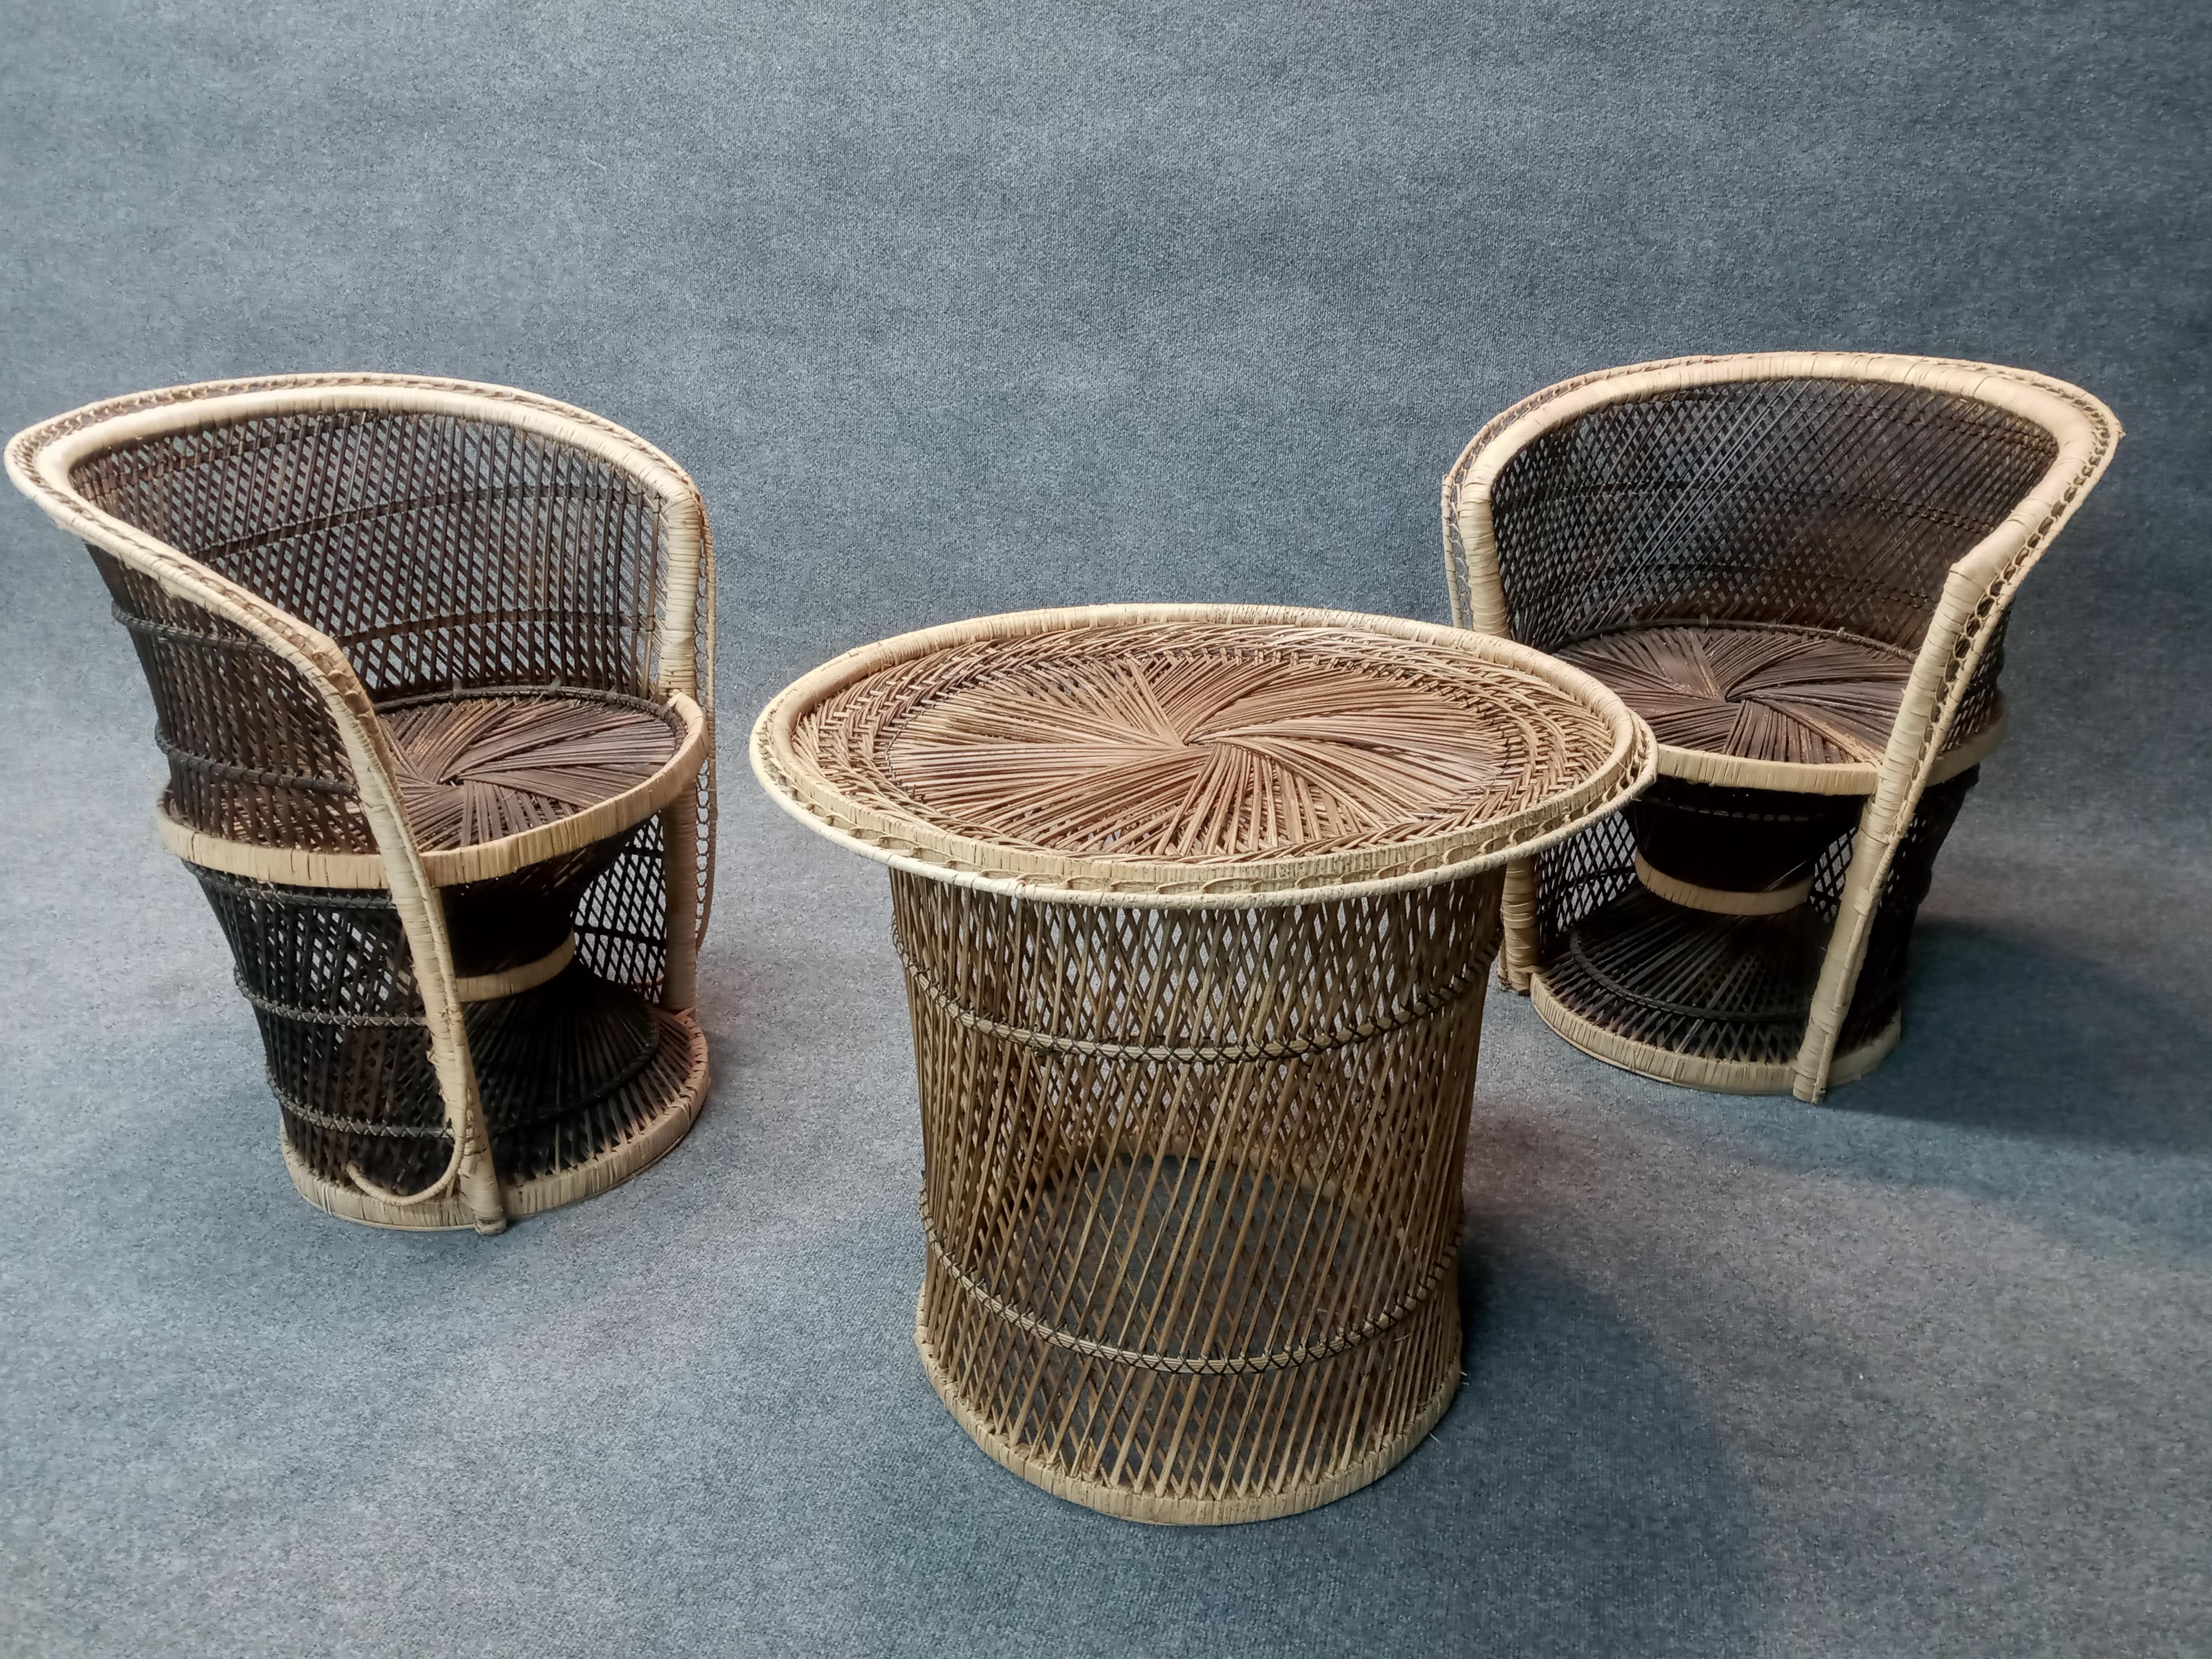 Vintage Boho Chic Wicker, Rattan, Bamboo, Pair of Chairs & Matching Table Set 1